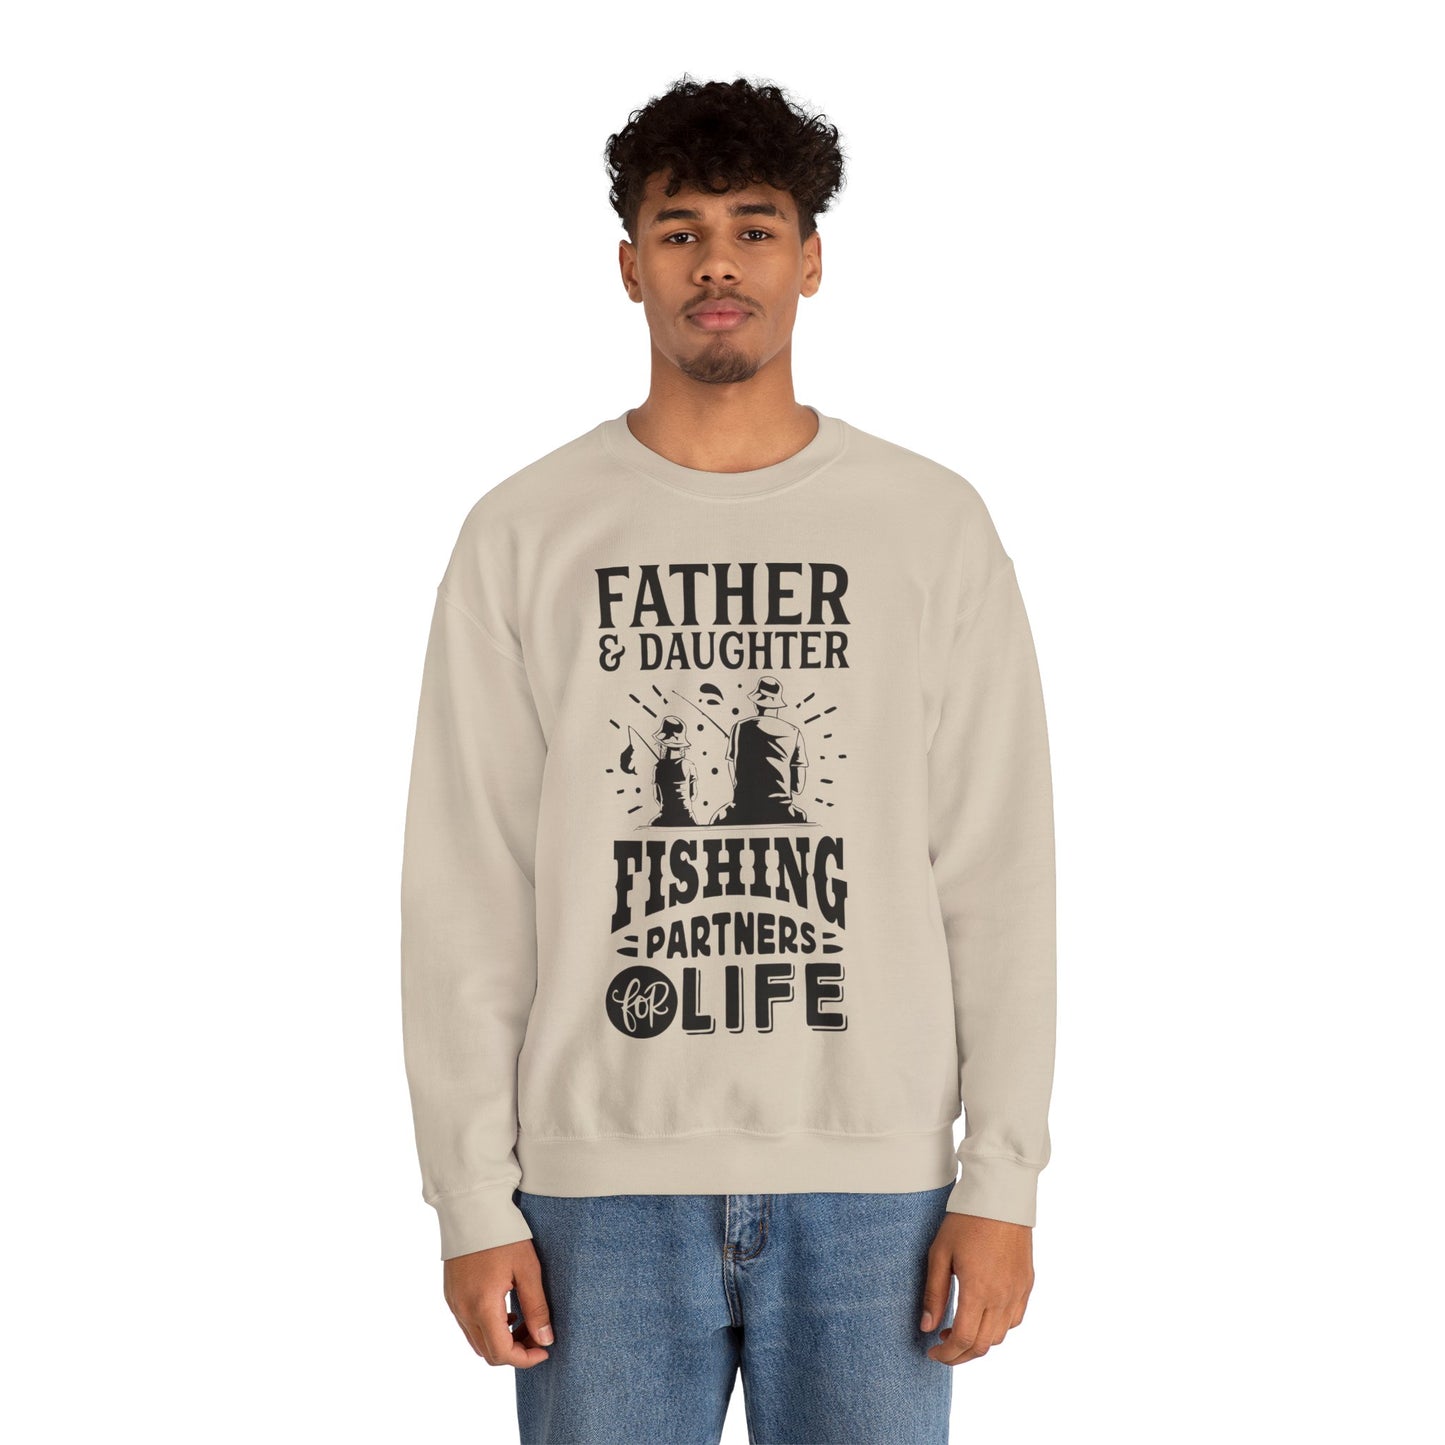 Father and Daughter for life - Unisex Heavy Blend™ Crewneck Sweatshirt